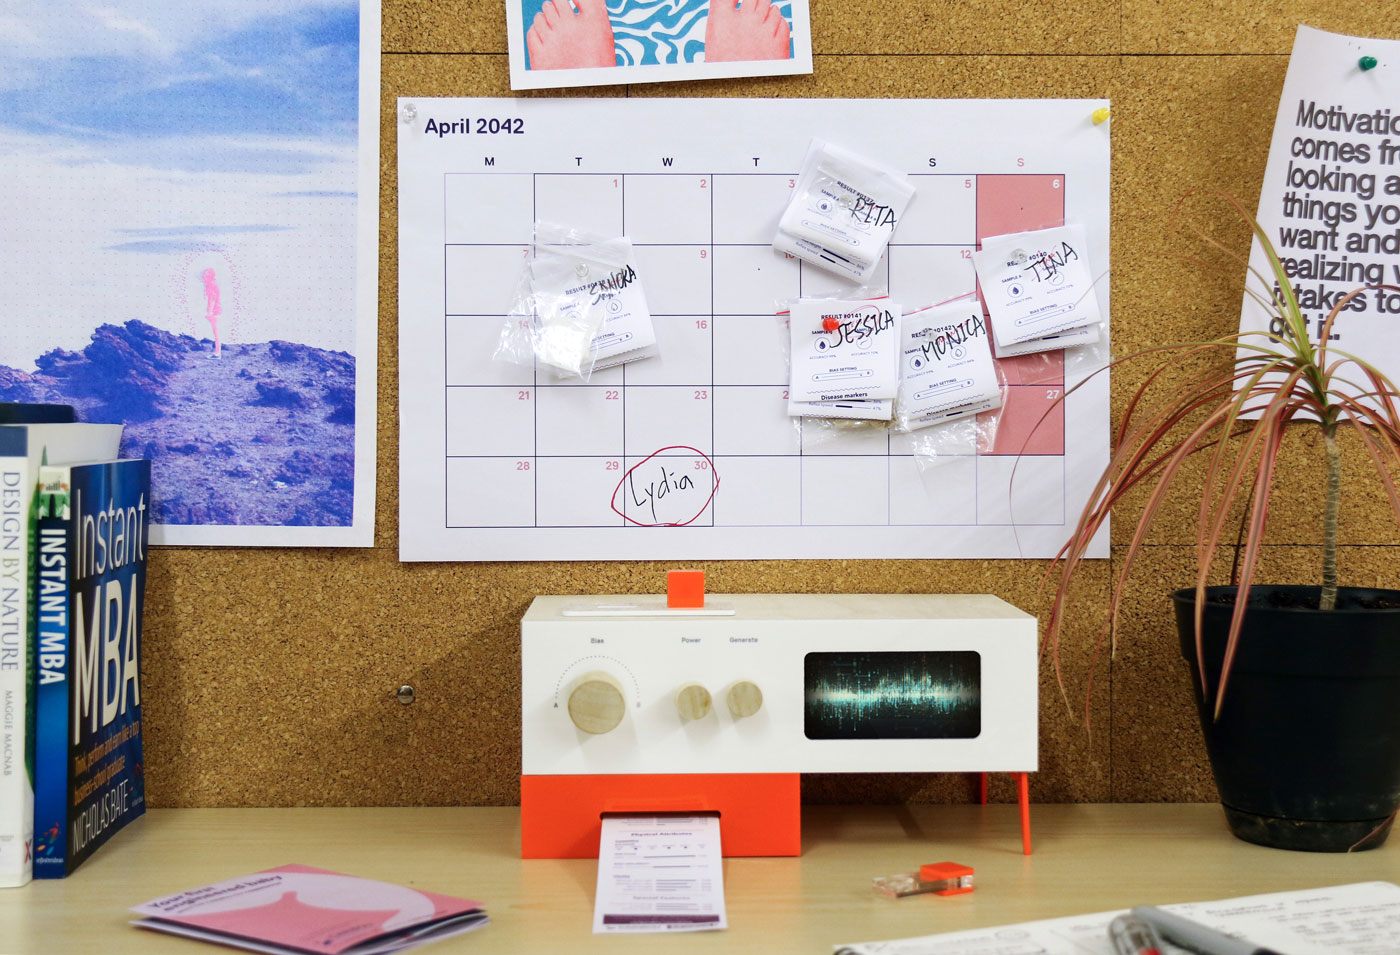 The Combinator sits on a desk below a calendar showing names and hair samples from several dates